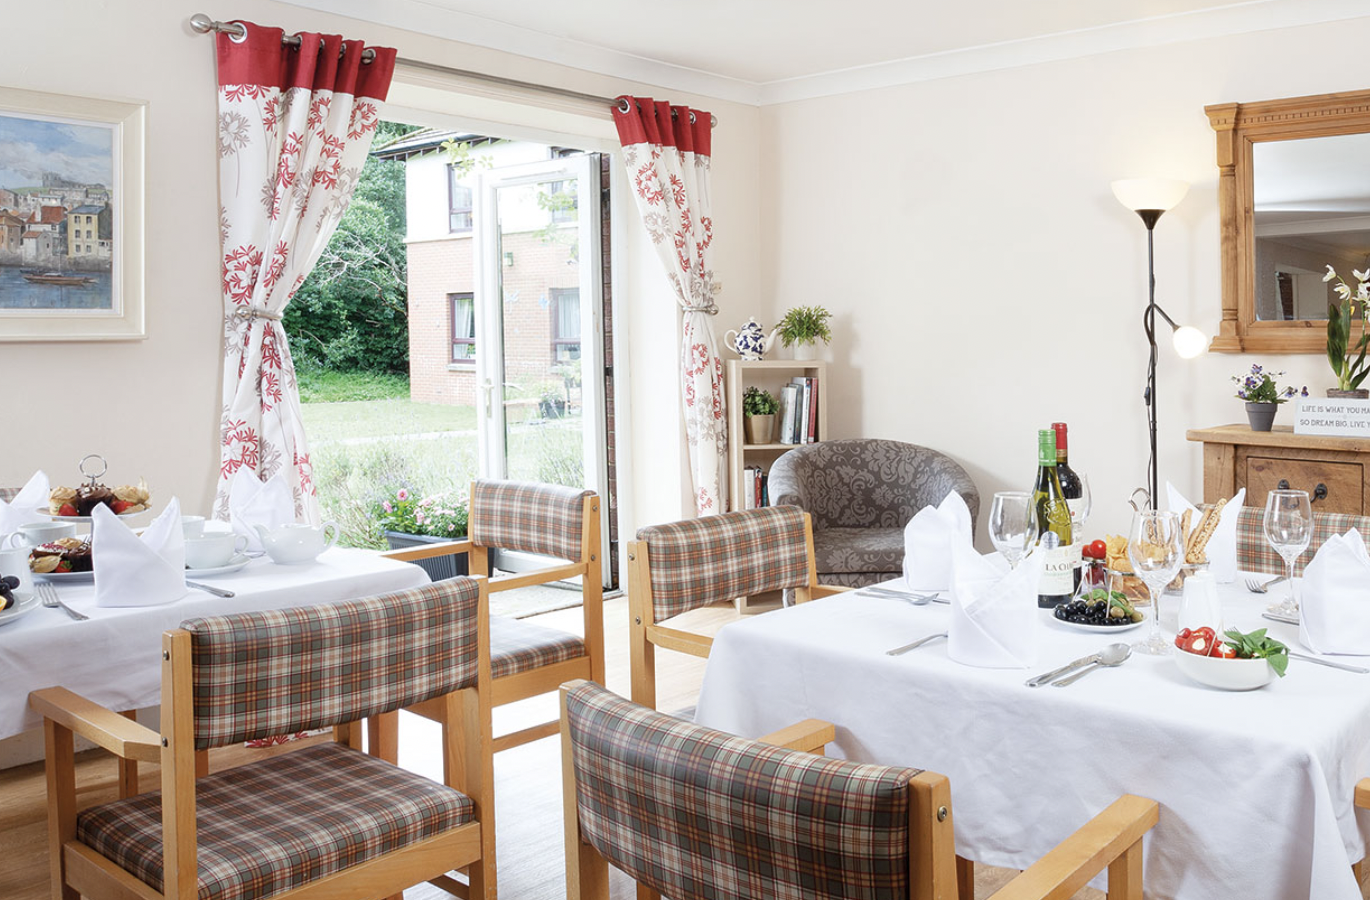 Abbey Healthcare - Abbey Lodge care home 2